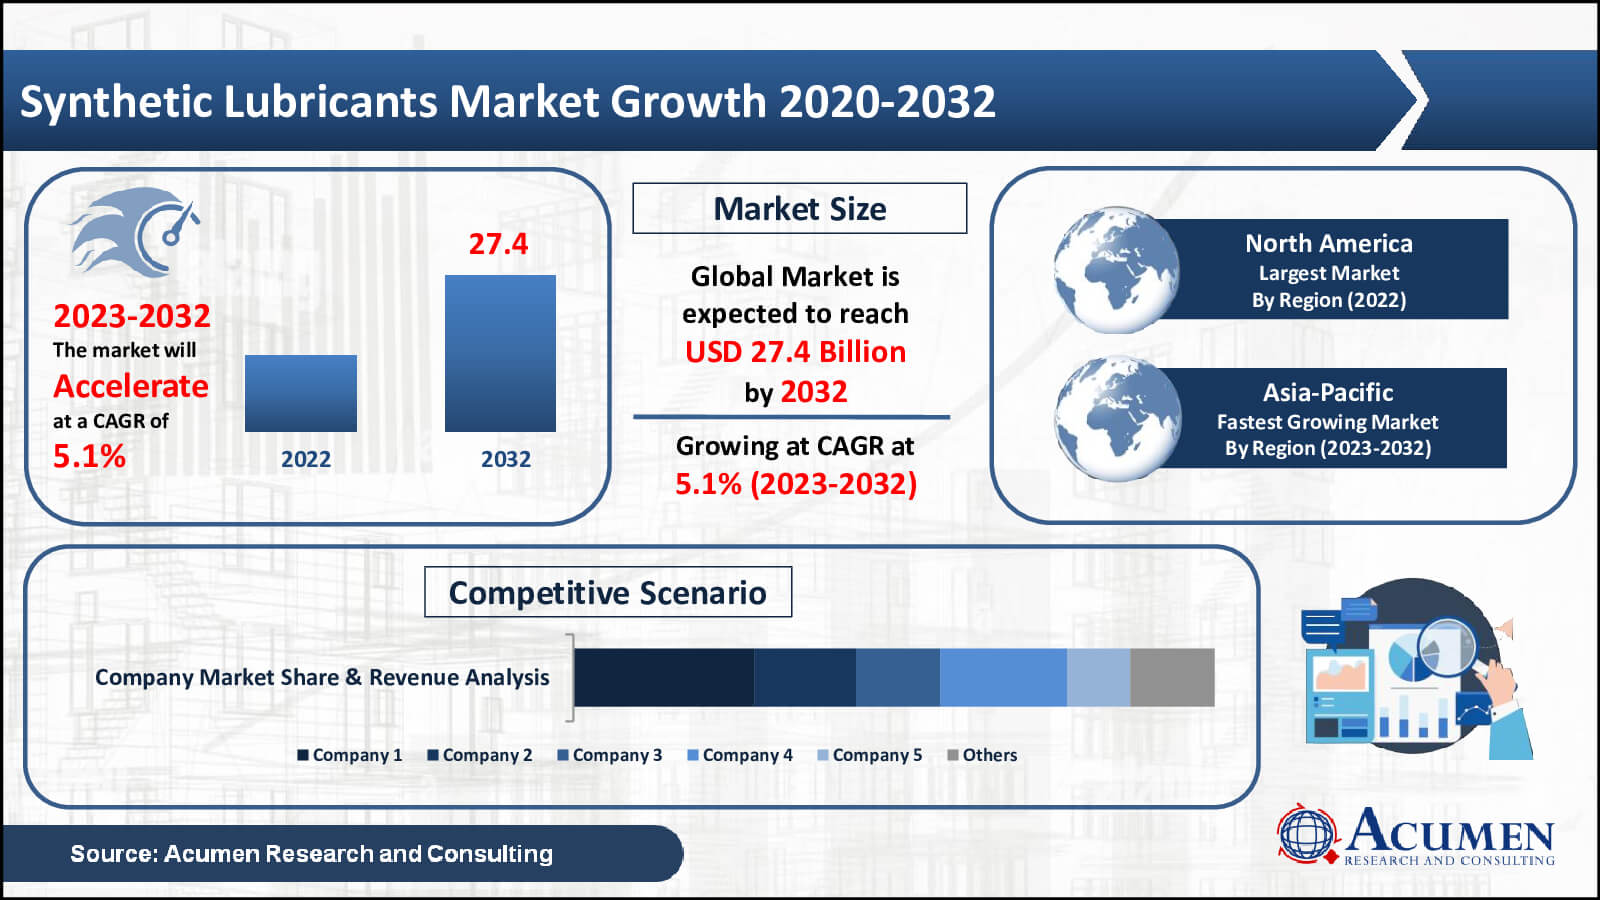 https://www.acumenresearchandconsulting.com/reportimages/Website-PR-Image_Global-Synthetic-Lubricants-Market.jpg